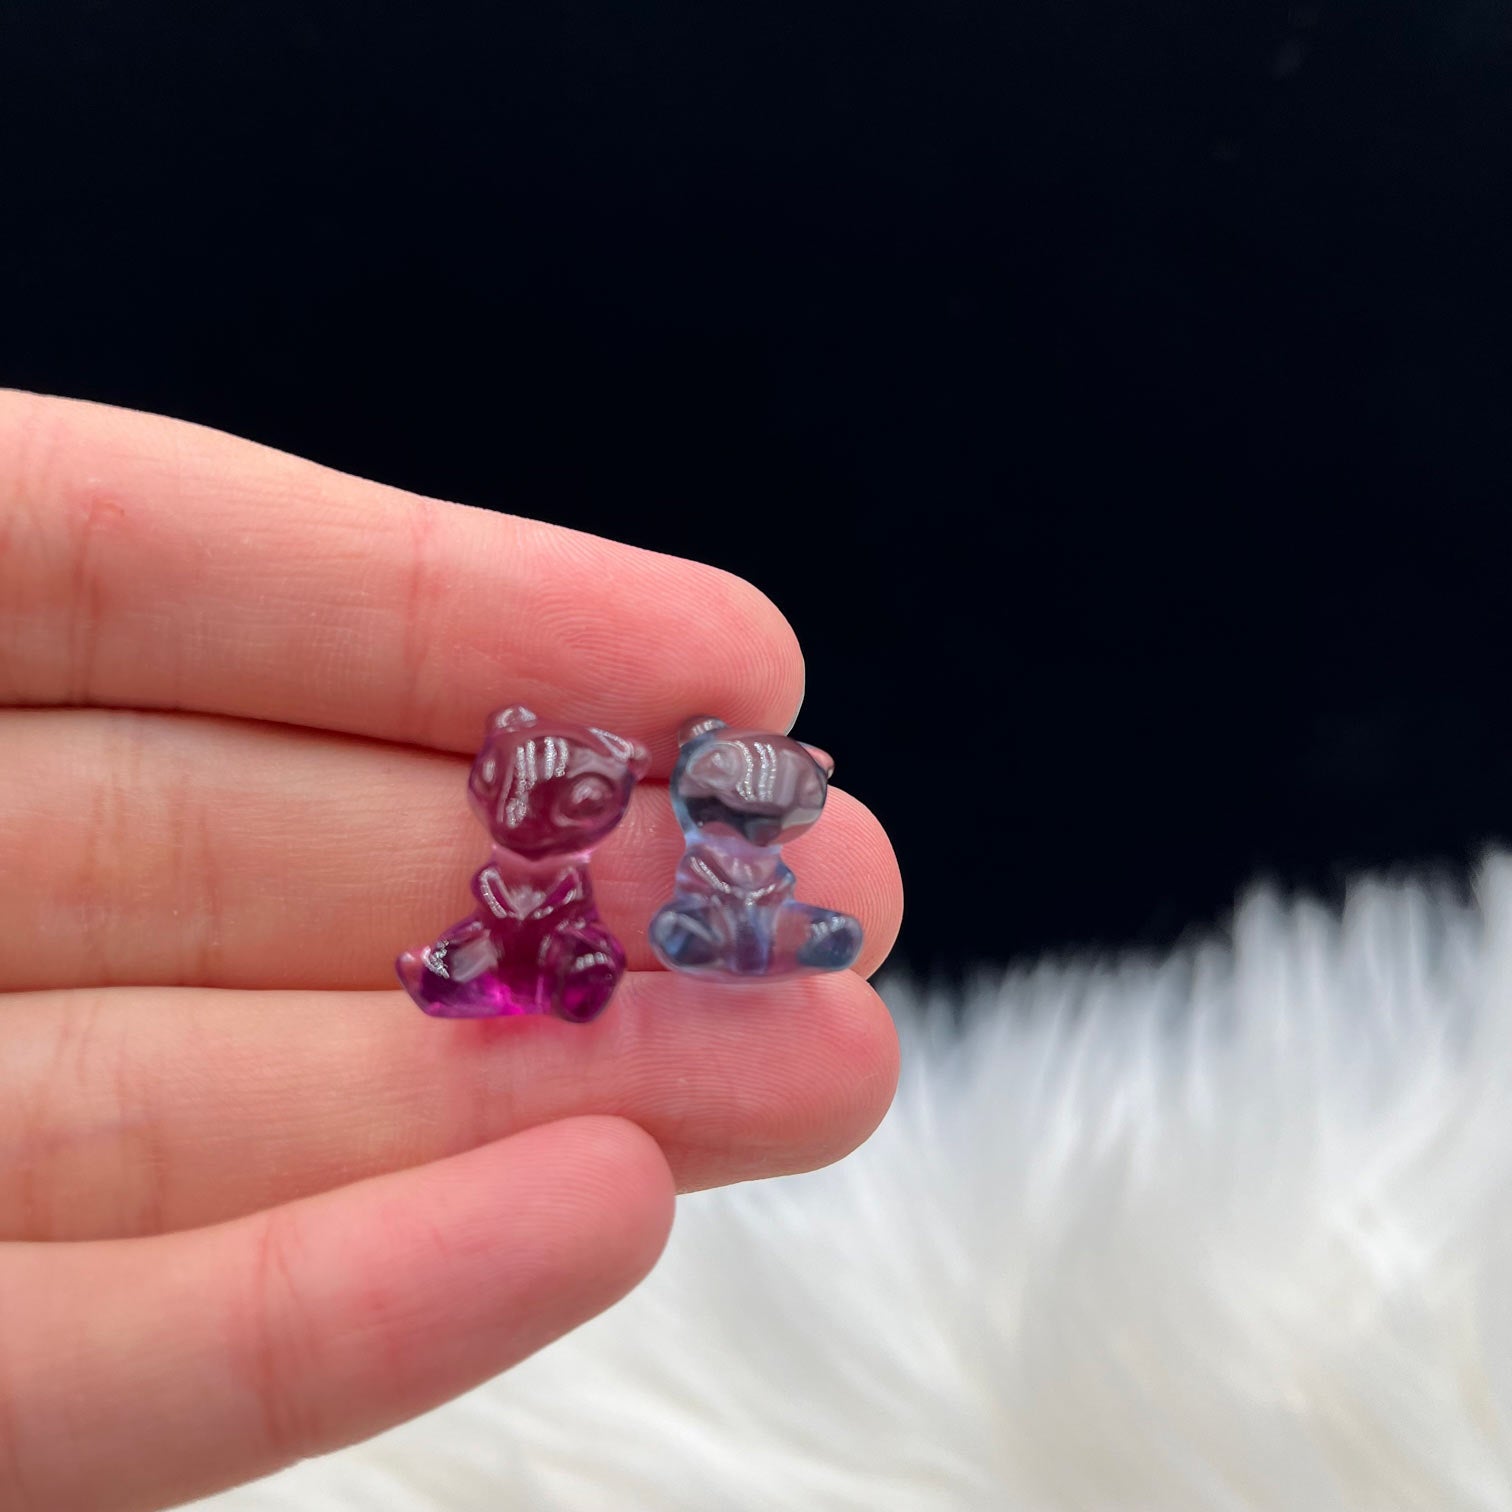 Mini Fluorite Cartoons and Film Characters collectibles4